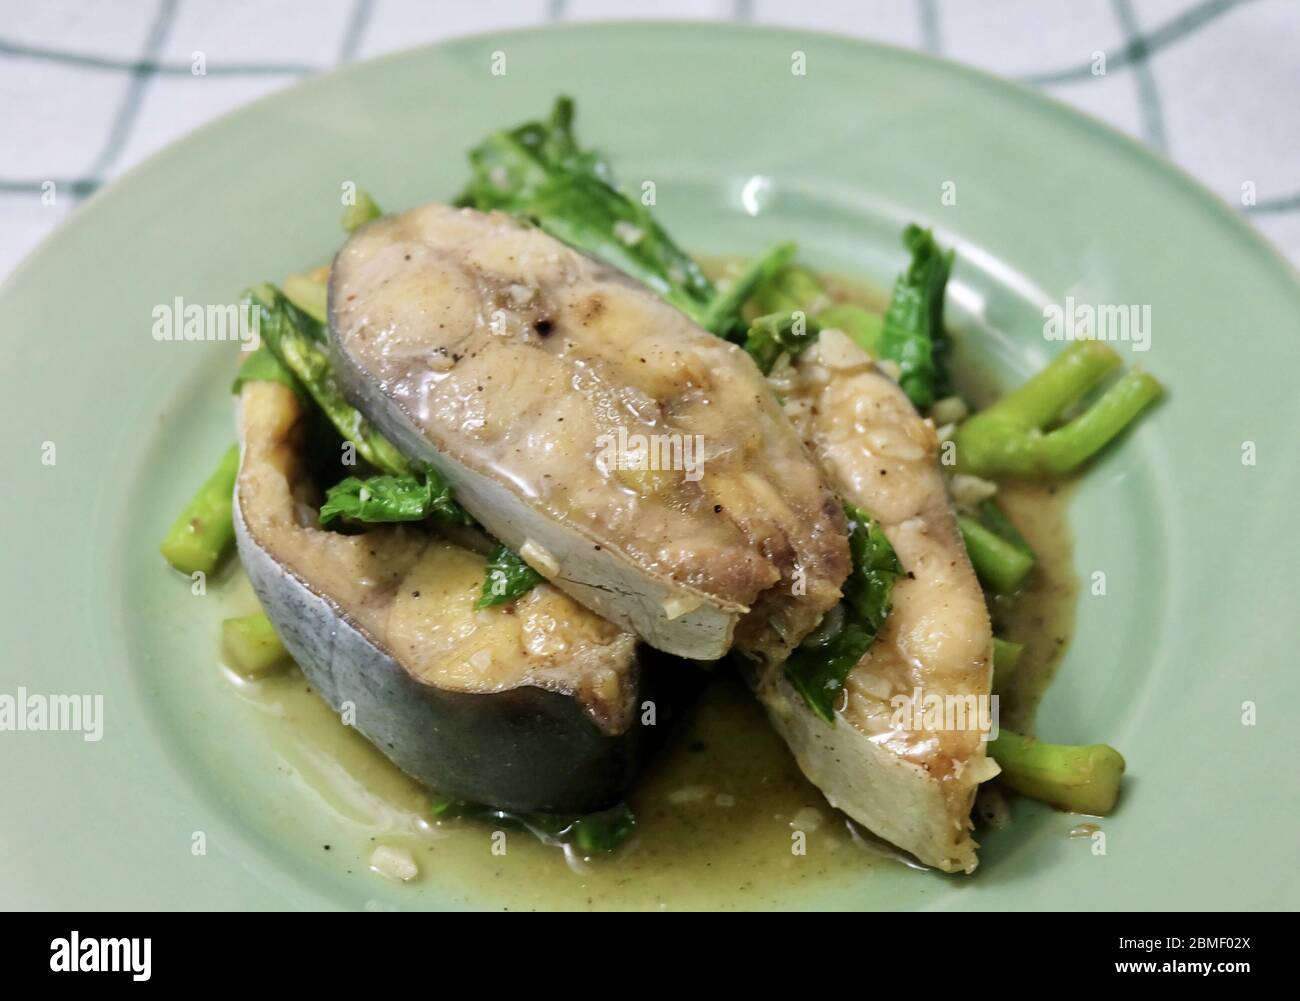 Thai Cuisine and Food, Stir Fried Fillet Pangasius Fish or Striped Catfish with Chinese Kale. Stock Photo